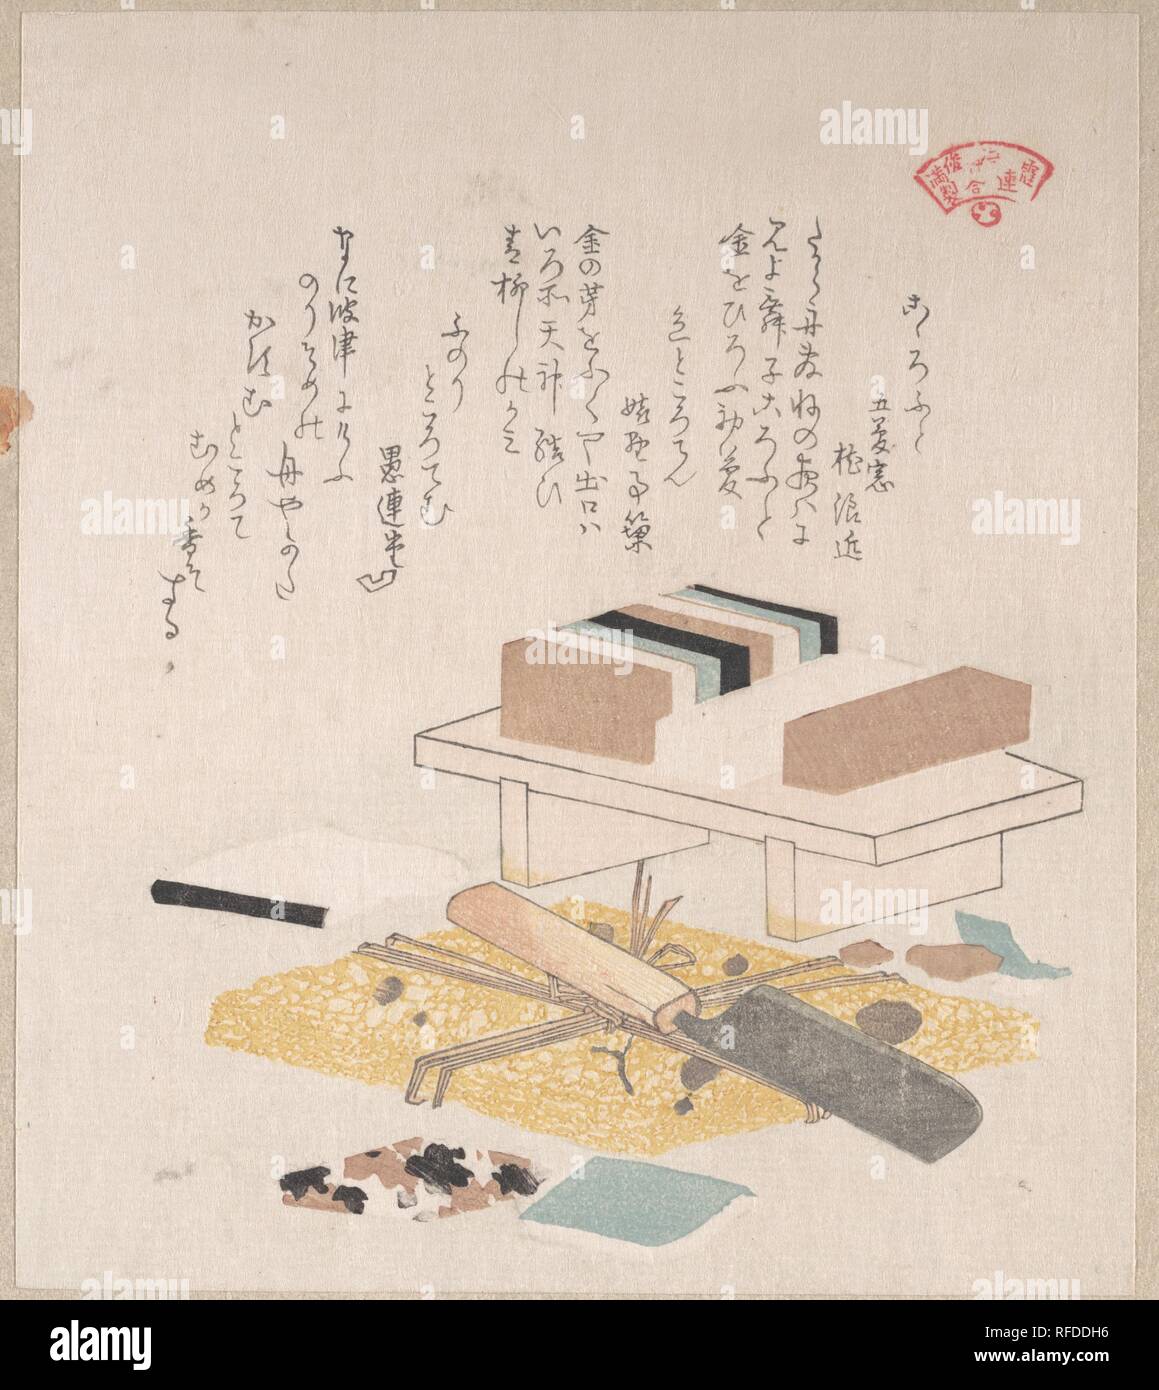 Seaweed Food and Kitchen Utensils. Artist: Kubo Shunman (Japanese, 1757-1820). Culture: Japan. Dimensions: 8 3/8 x 7 1/4 in. (21.3 x 18.4 cm). Date: 19th century. Museum: Metropolitan Museum of Art, New York, USA. Stock Photo